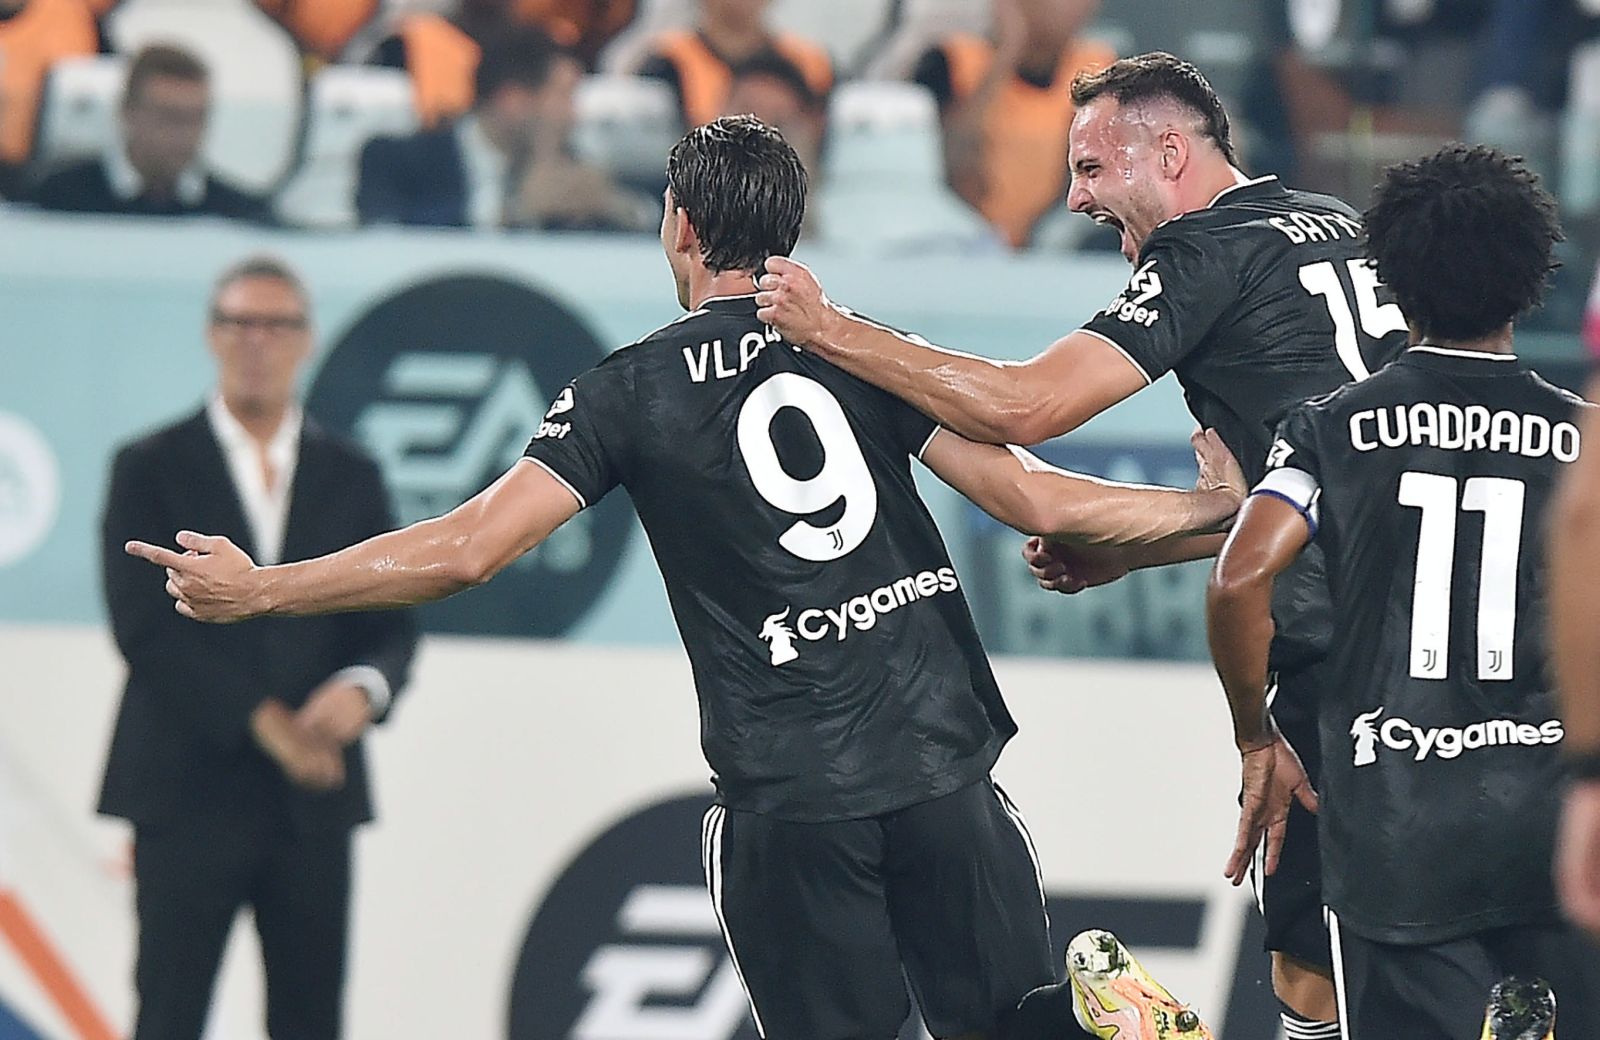 epa10150498 Juventus’ Dusan Vlahovic (L) jubilates after scoring the opening goal during the Italian Serie A soccer match Juventus FC vs Spezia Calcio at the Allianz Stadium in Turin, Italy, 31 August 2022.  EPA/ALESSANDRO DI MARCO